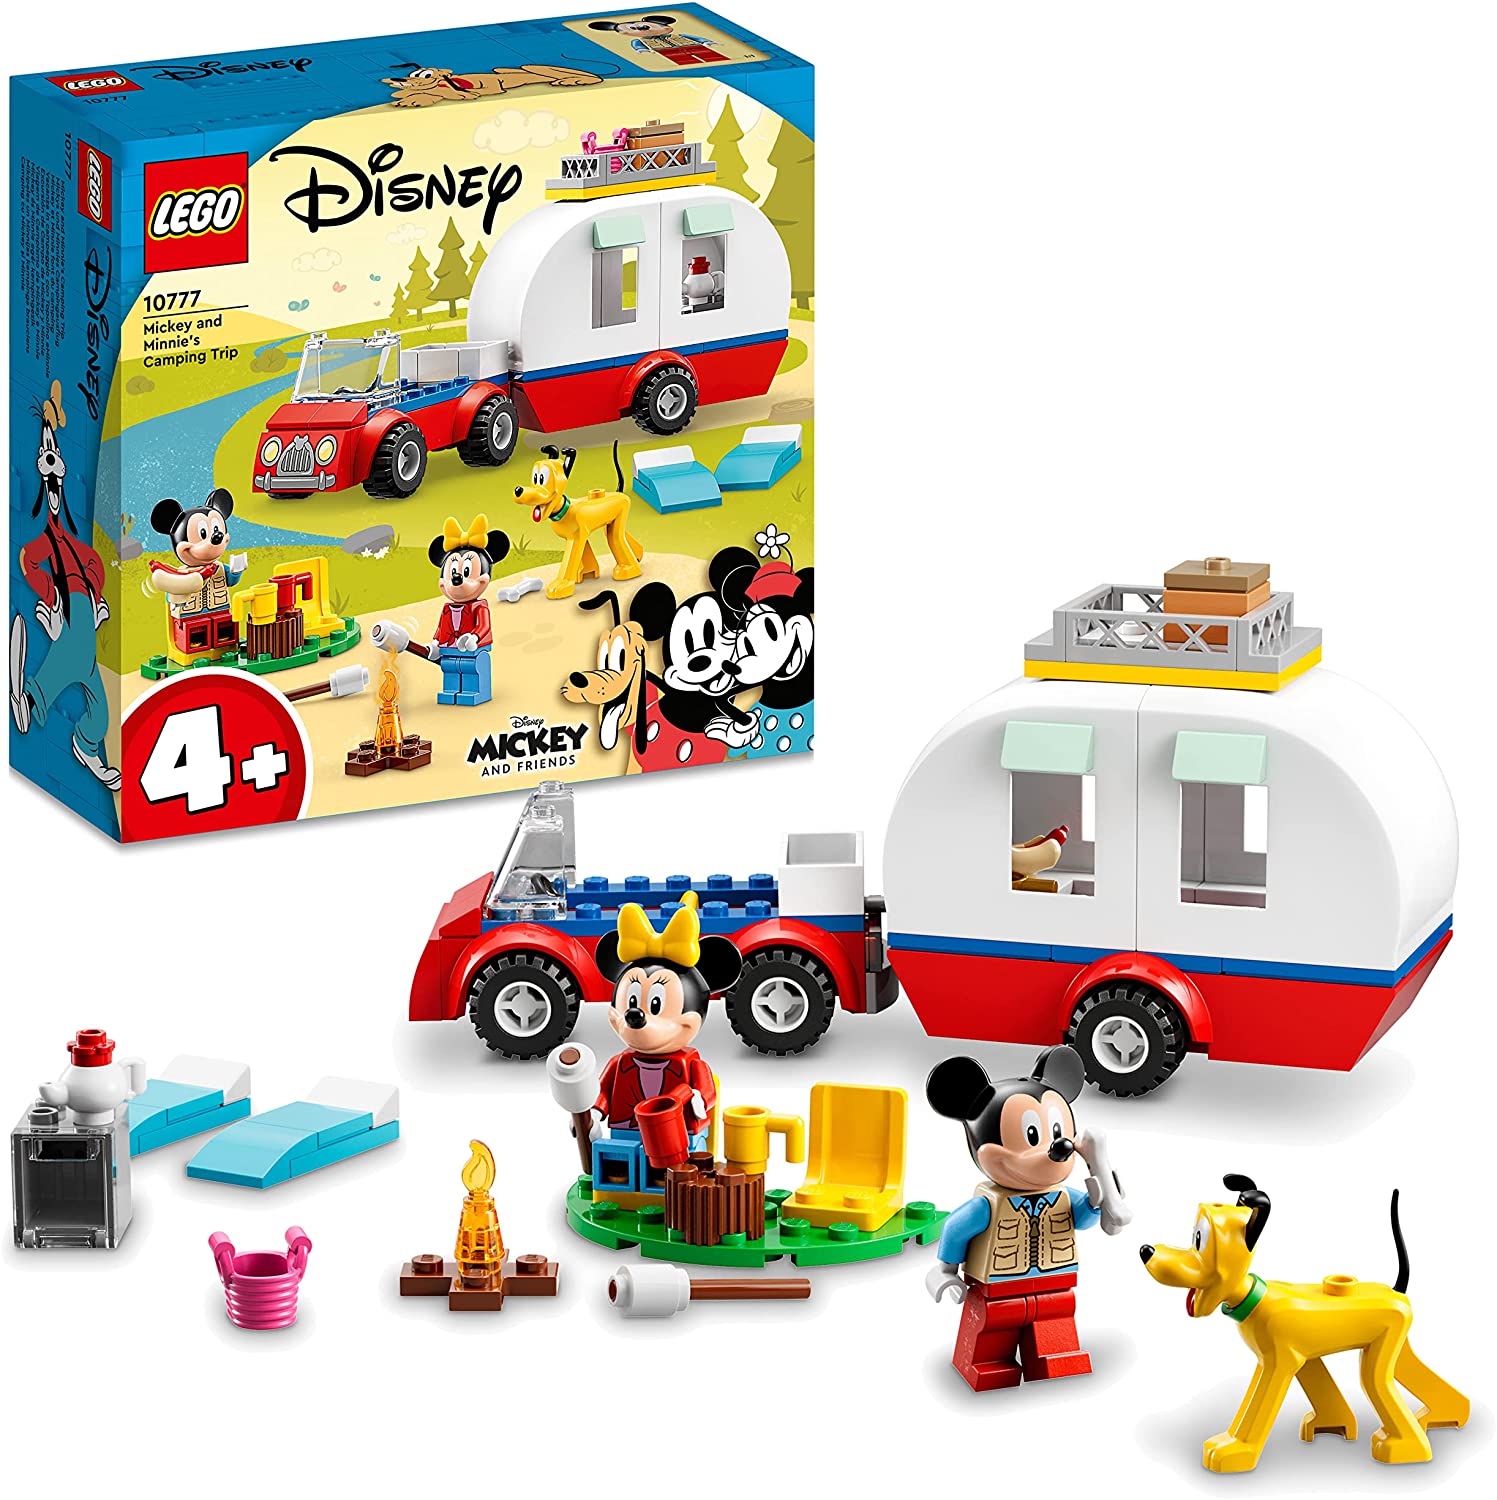 LEGO 10777 Disney Mickey and Minnies Camping Trip, Motorhome with Minnie, Mickey Mouse and Pluto Dog Figures for Children from 4 Years